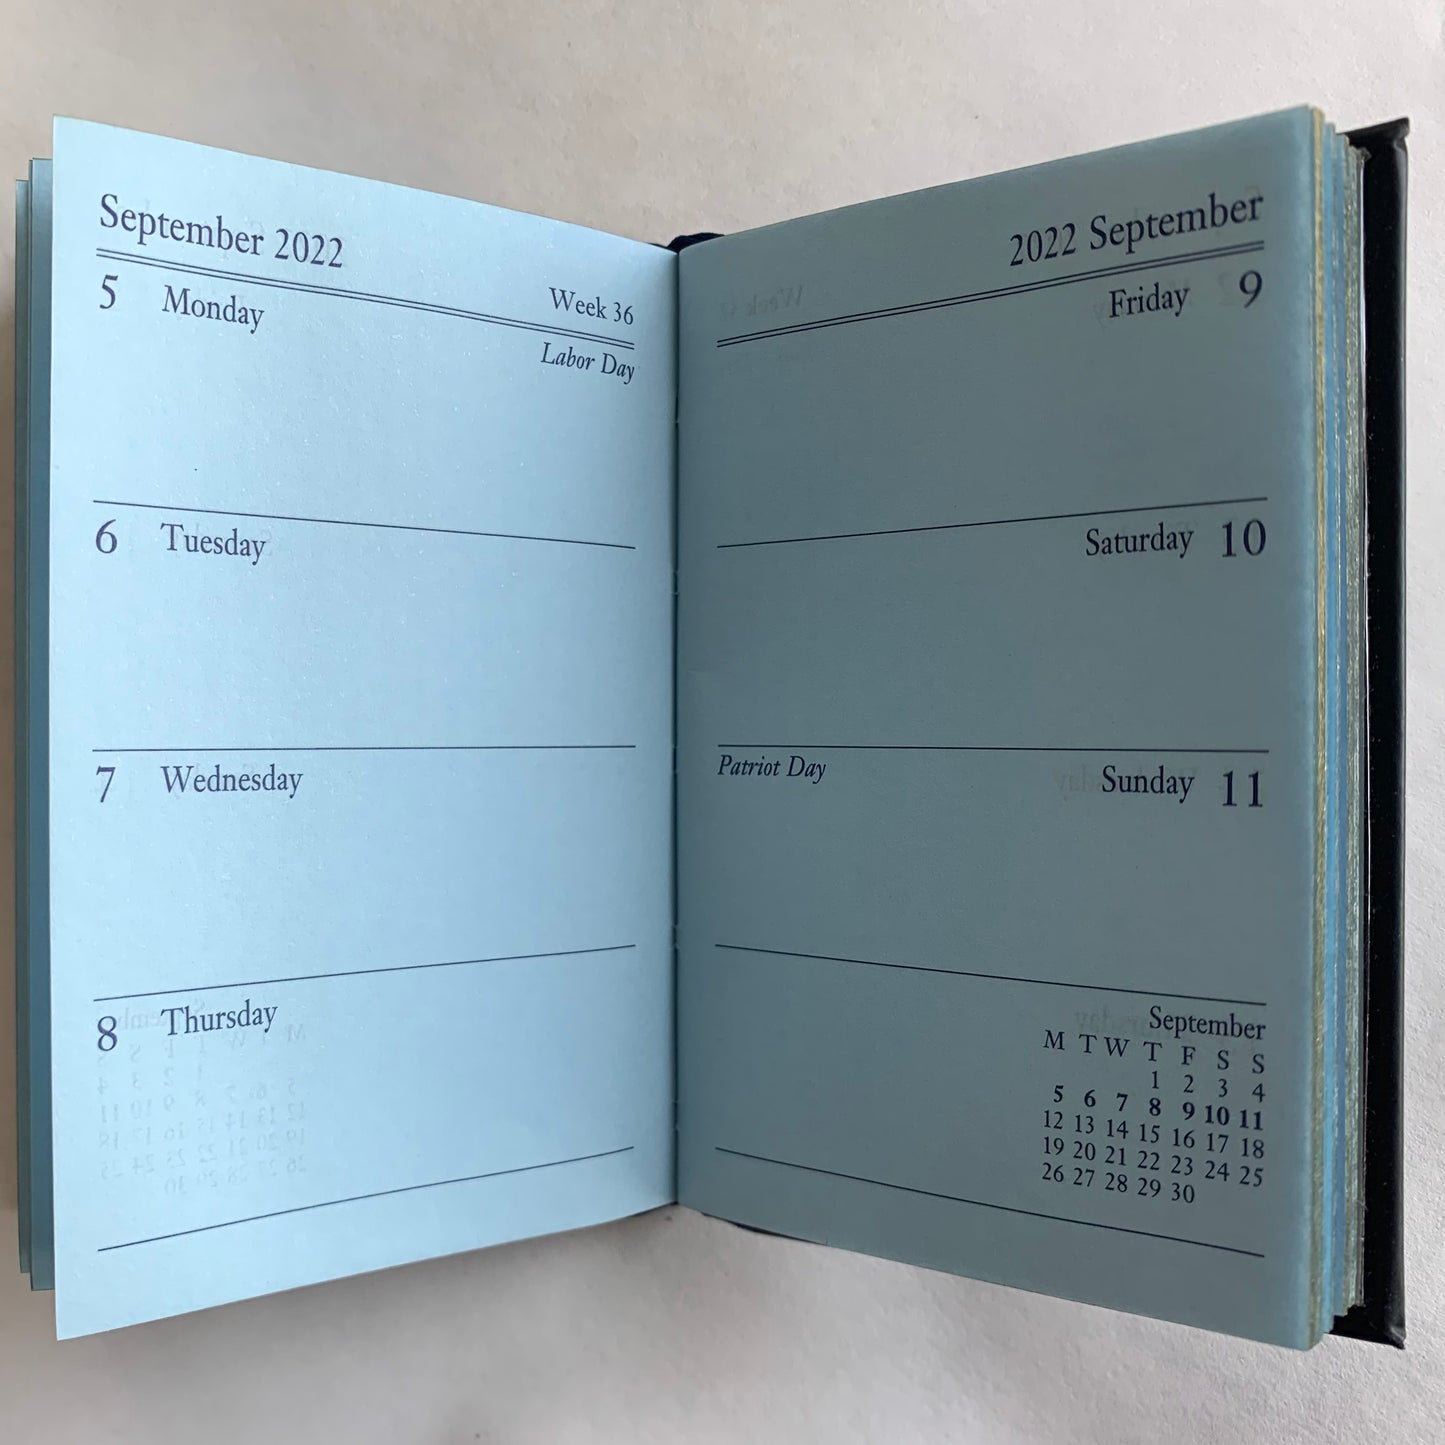 YEAR 2022 CALF Leather Pocket Agenda Book | 4 by 2.5" | D742C